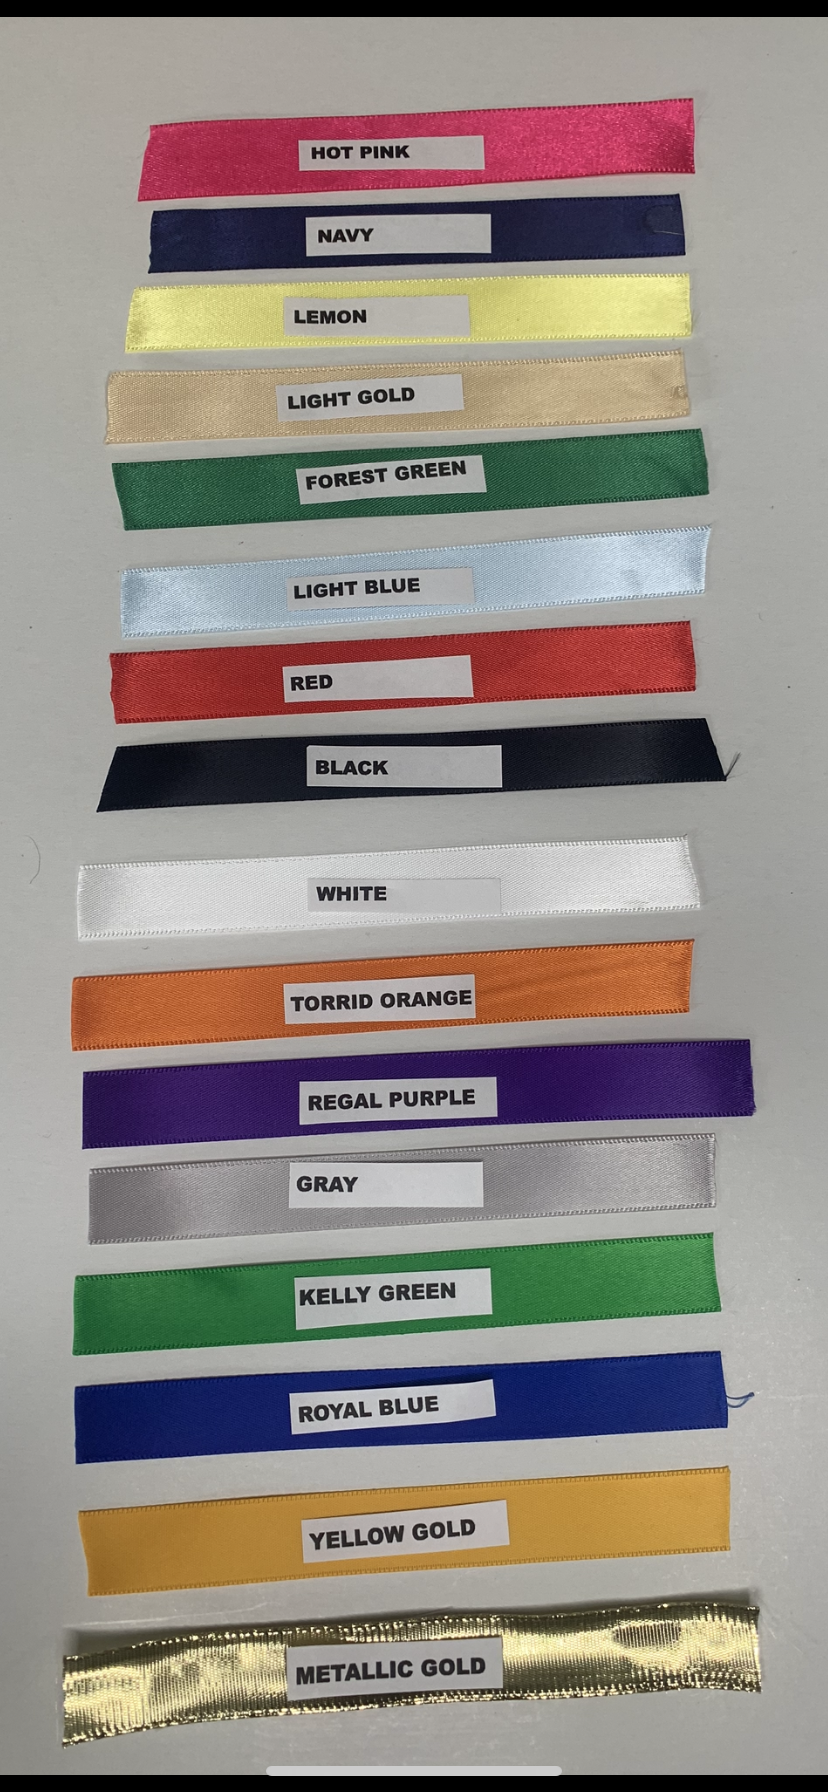 Ribbon Selections.  If you do not see the color you want, message seller and see if others are available.